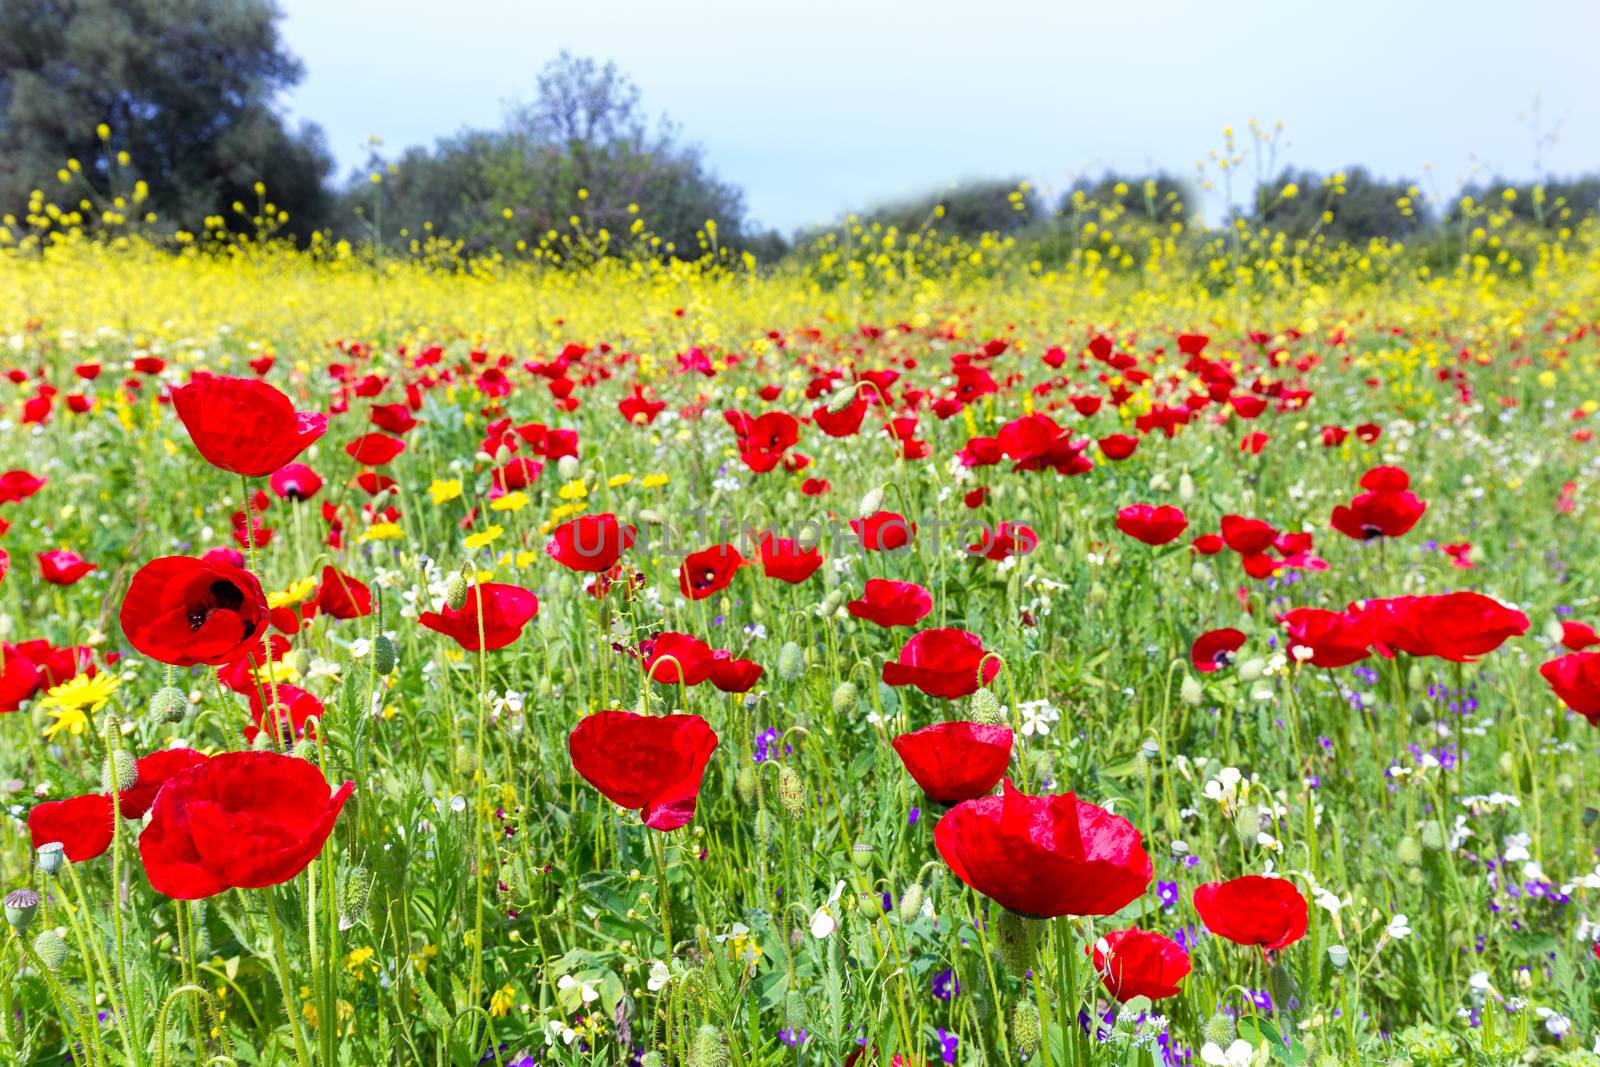 Landscape field of red poppy flowers with yellow rapeseed plants in summer season